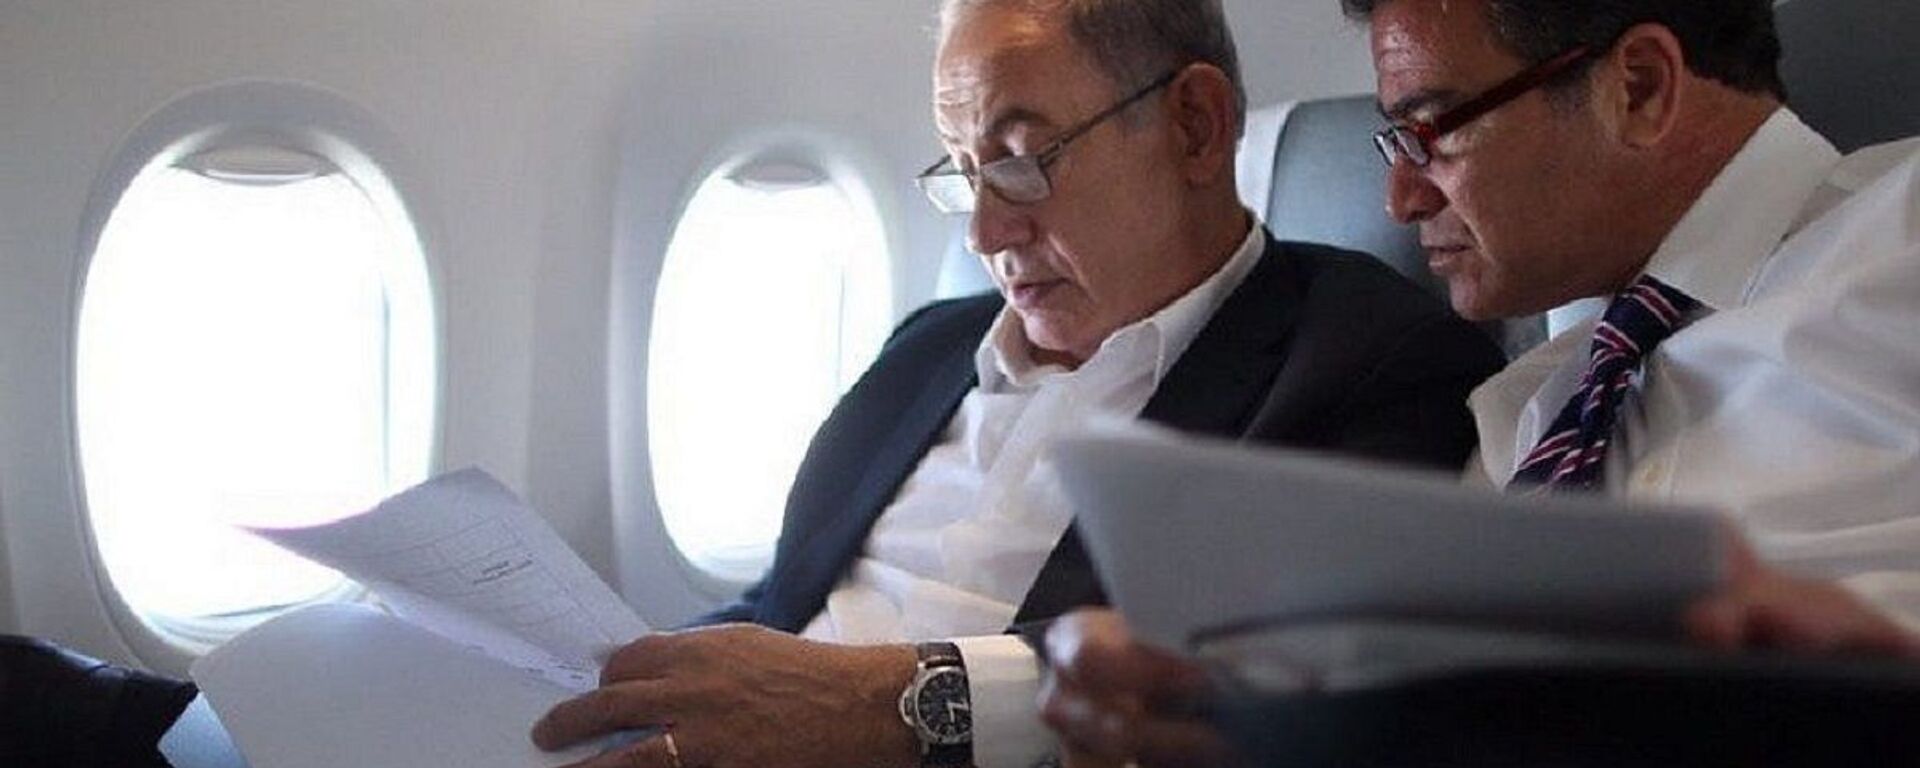 Benjamin Netanyahu and Yossi Cohen look over documents in a photo posted on social media by Netanyahu on December 7, 2015, shortly after he named Cohen as the new Mossad chief - Sputnik International, 1920, 18.06.2021